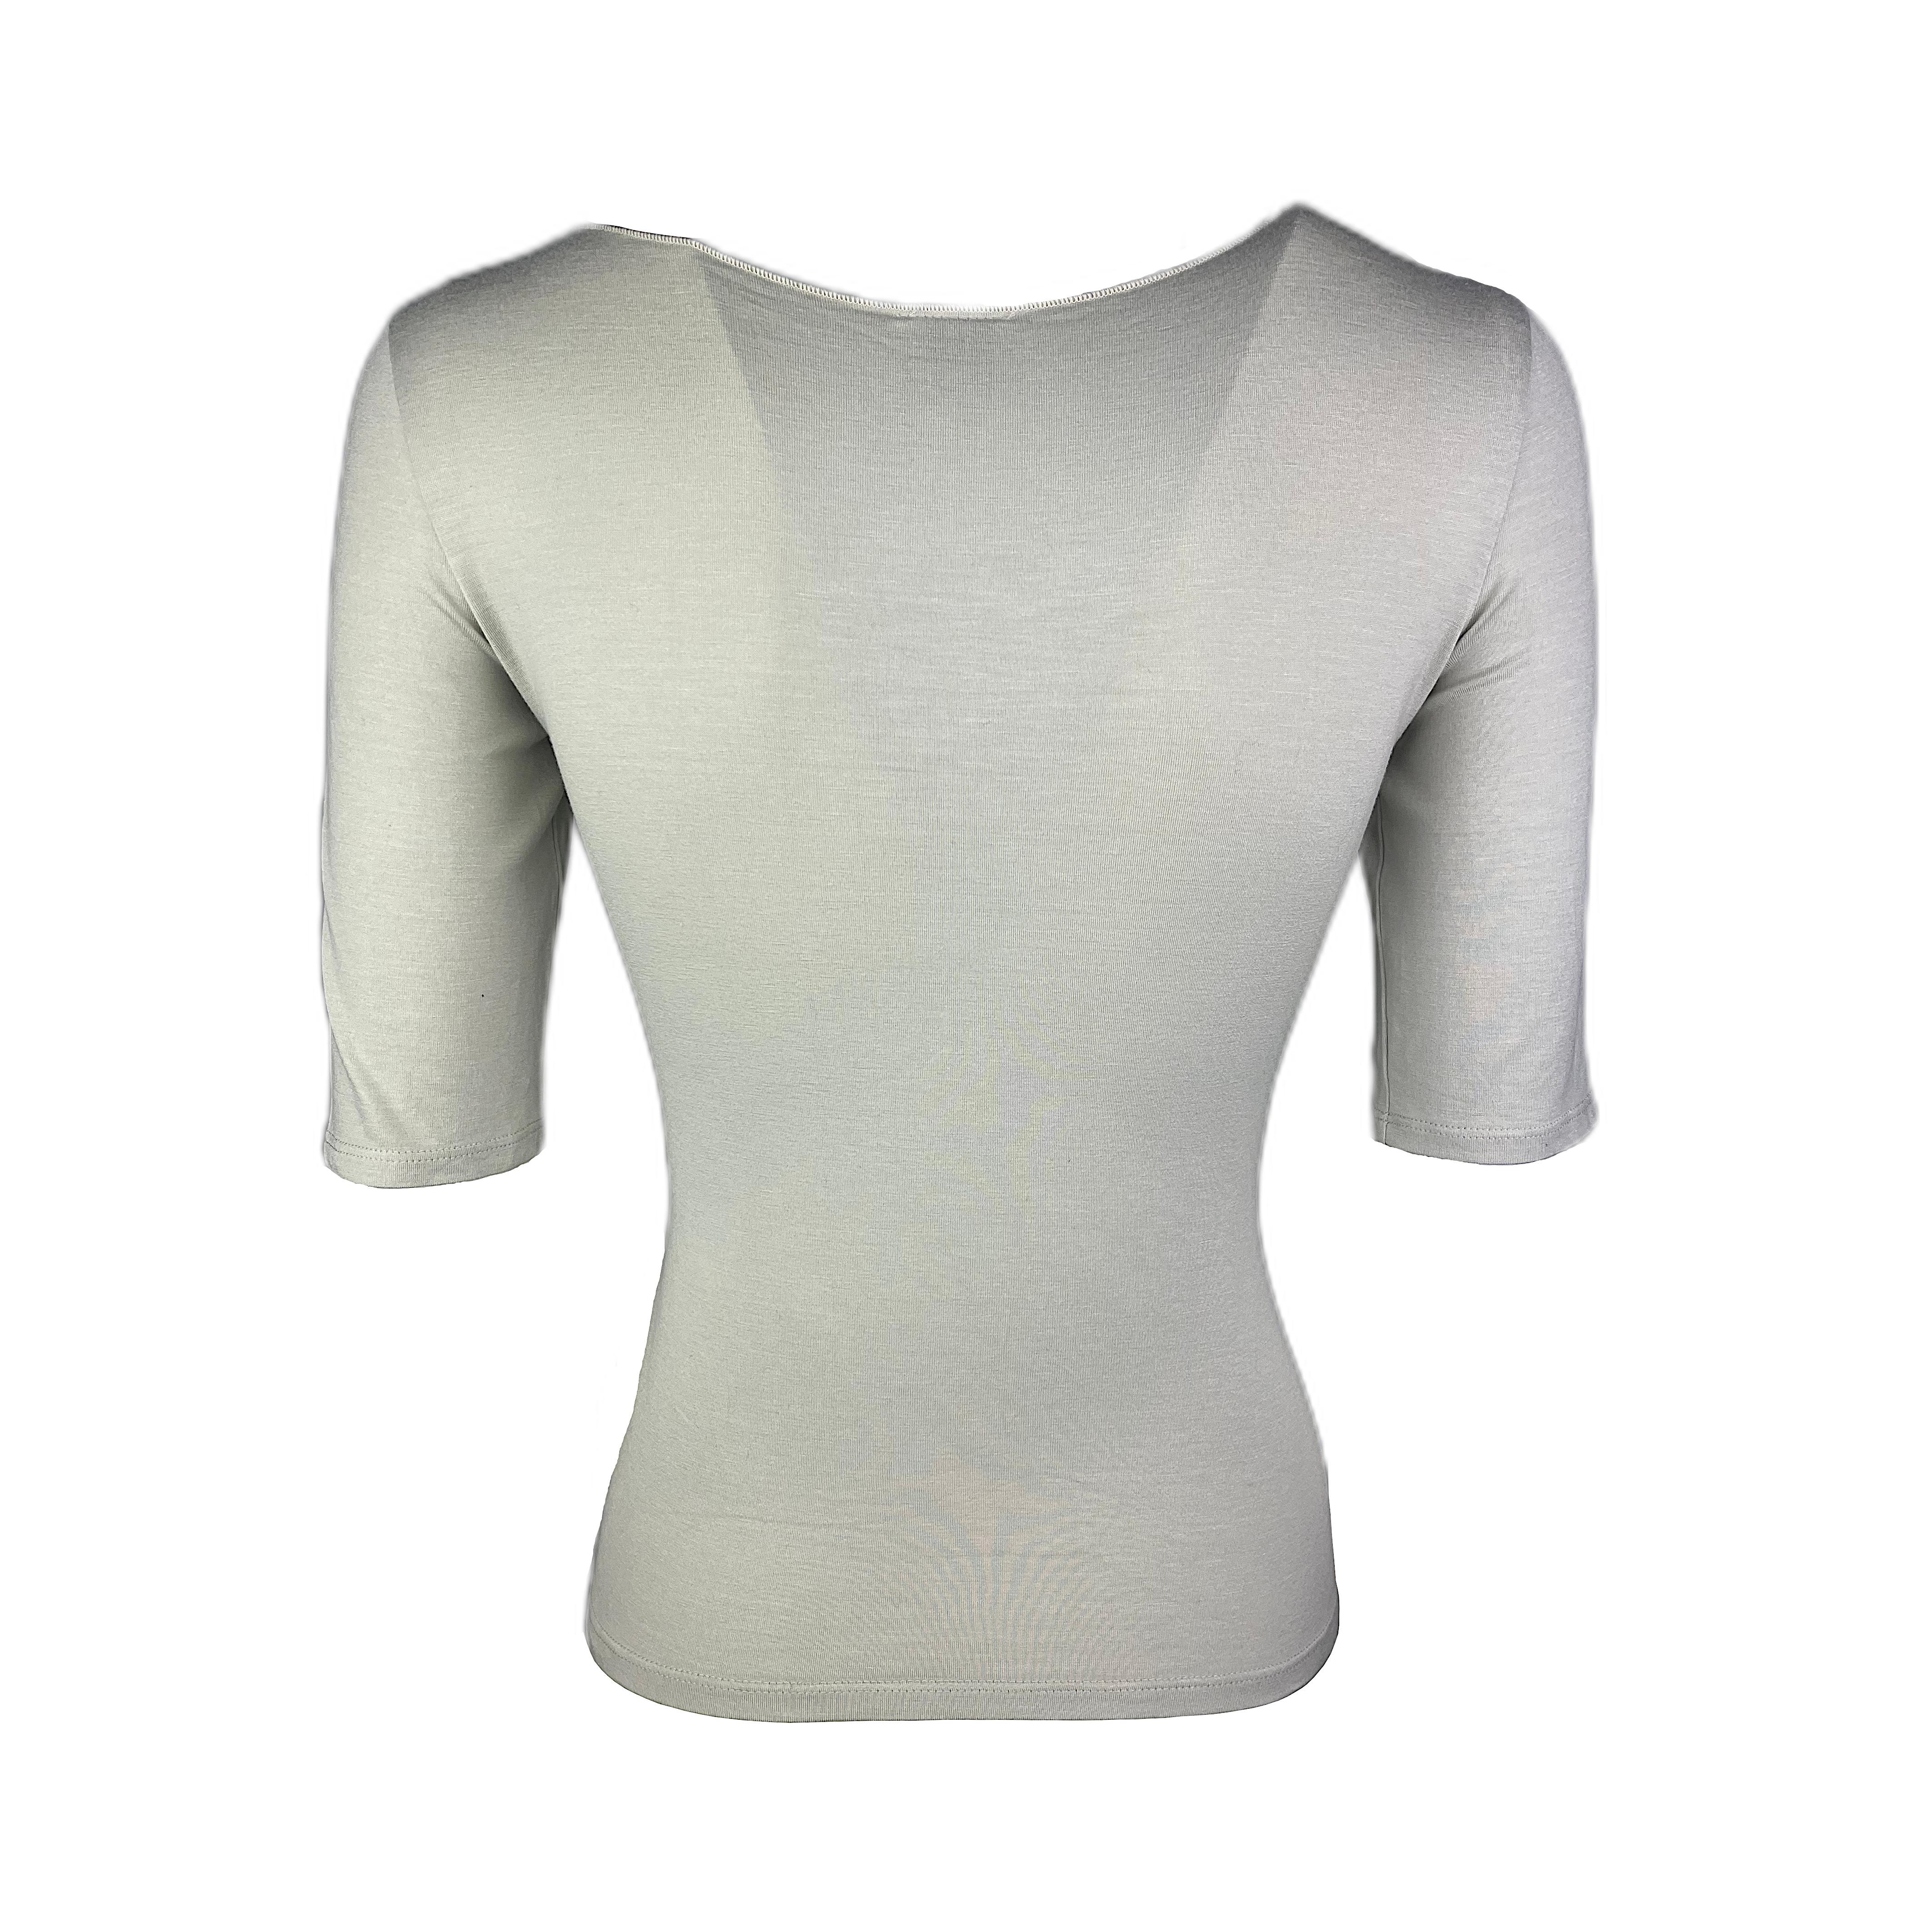 This elegant top features a V-shaped neckline and two wide stripes intersecting on the breast. It has half-sleeves ending just above the elbow and its neutral color, a light grey, will make it a perfect companion for many other pieces in your